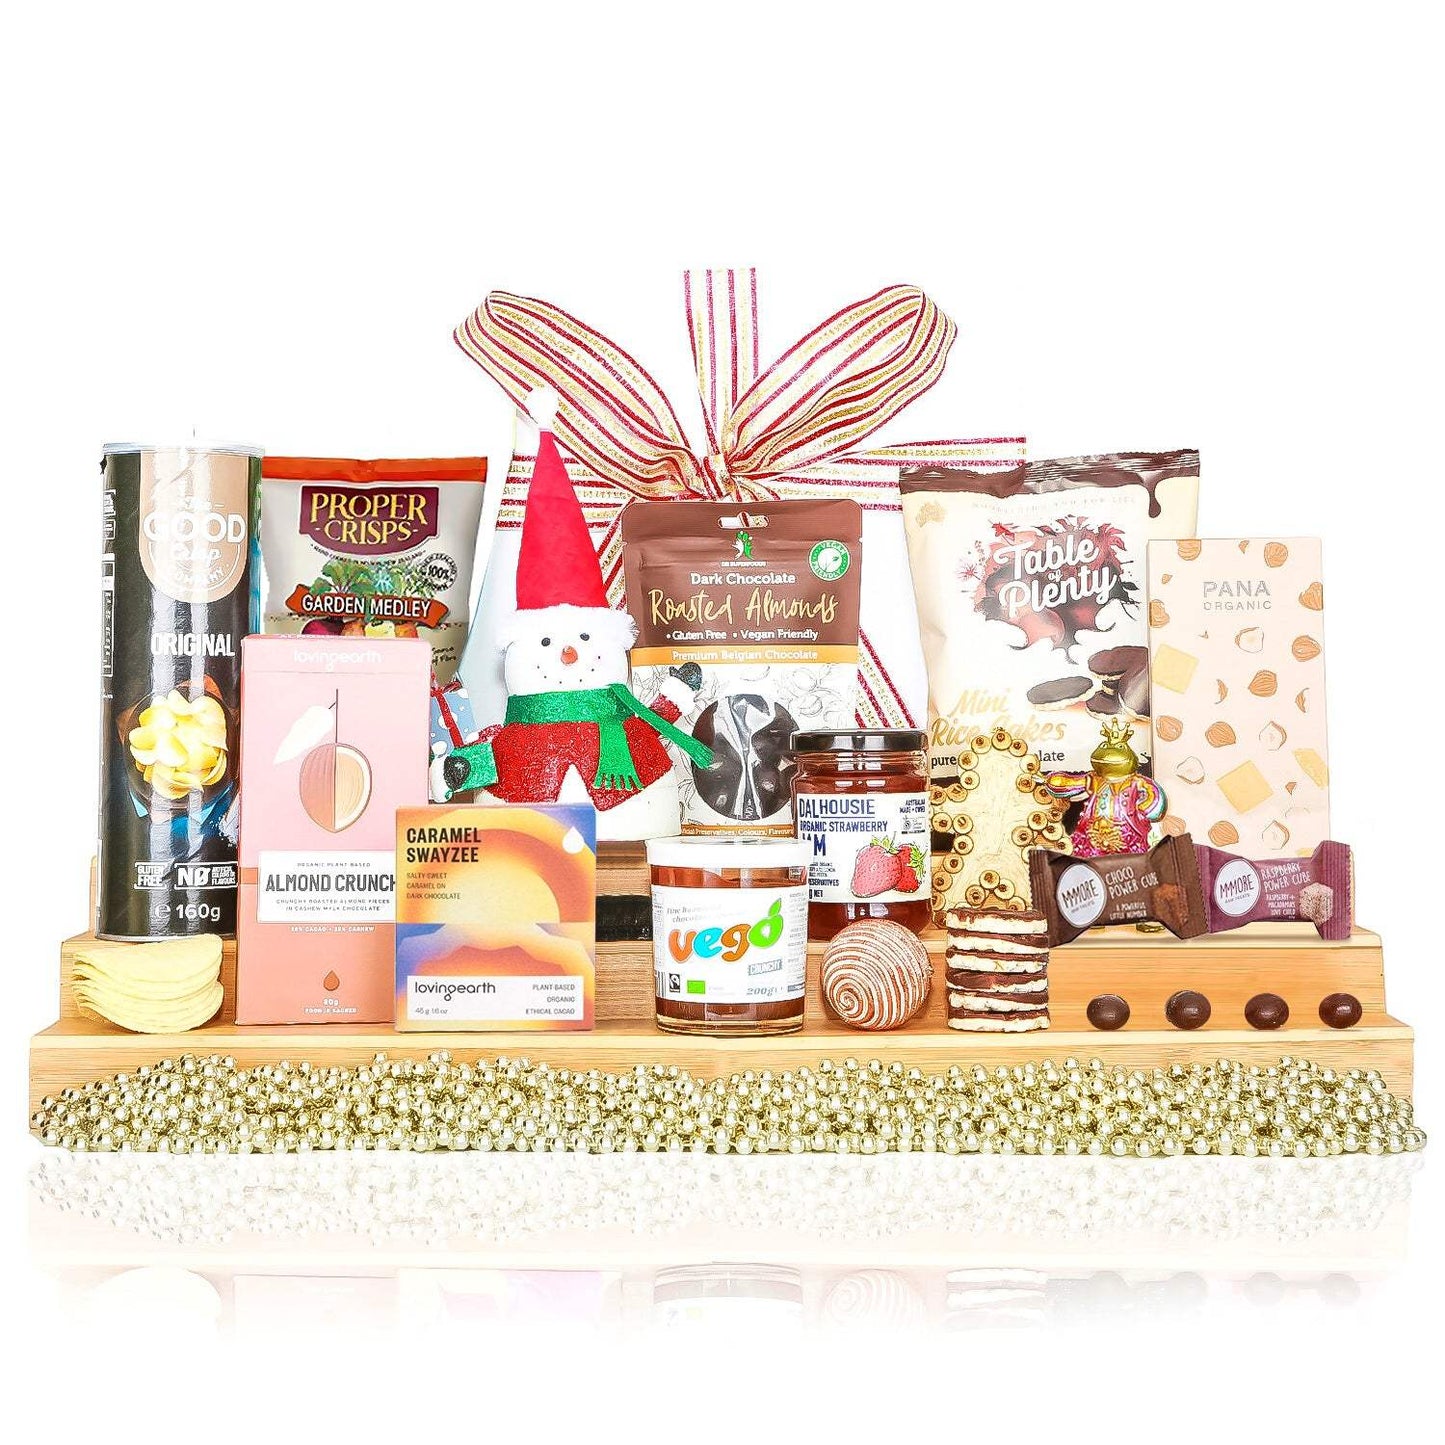 Family Christmas - Healthy Belly Hampers - pure indulgence - birthday hampers - gift hampers - gift hampers melbourne - gift hampers australia - organic hampers -vegan hampers - gluten free hampers - birthday hampers -anniversary hampers - wedding hampers - alcohol hampers